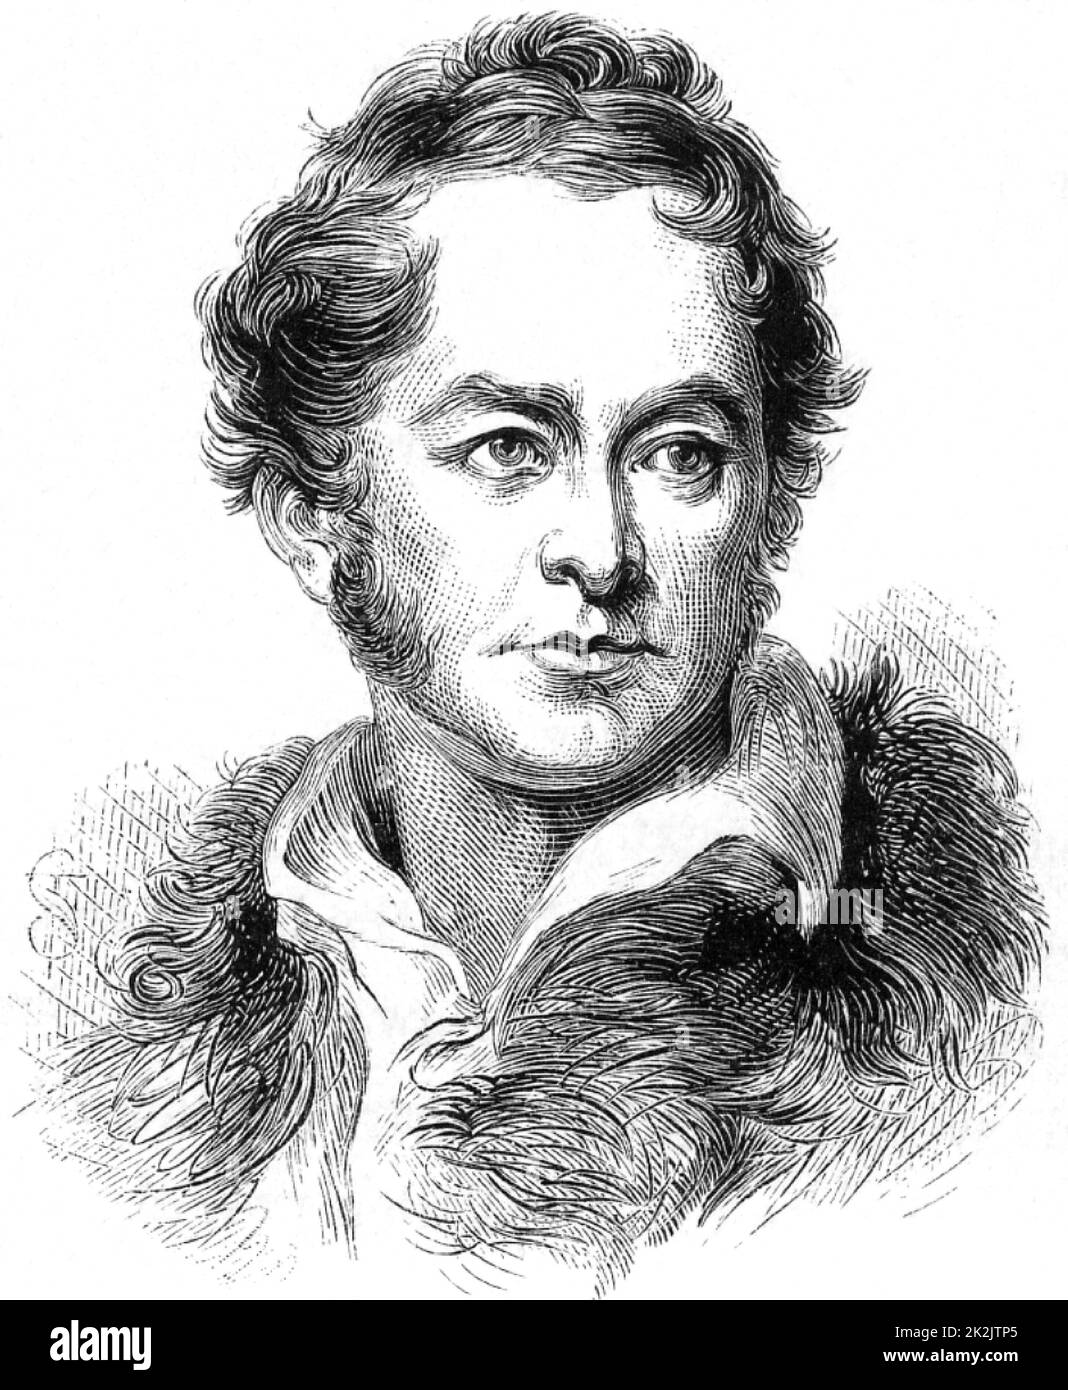 John Macculloch (1773-1835) Scottish geologist, chemist and physician. President of the Royal Geological Society 1816-1817. From 'Life of Sir Roderick I. Murchison' by Archibald Geikie (London, 1875). Engraving. Stock Photo